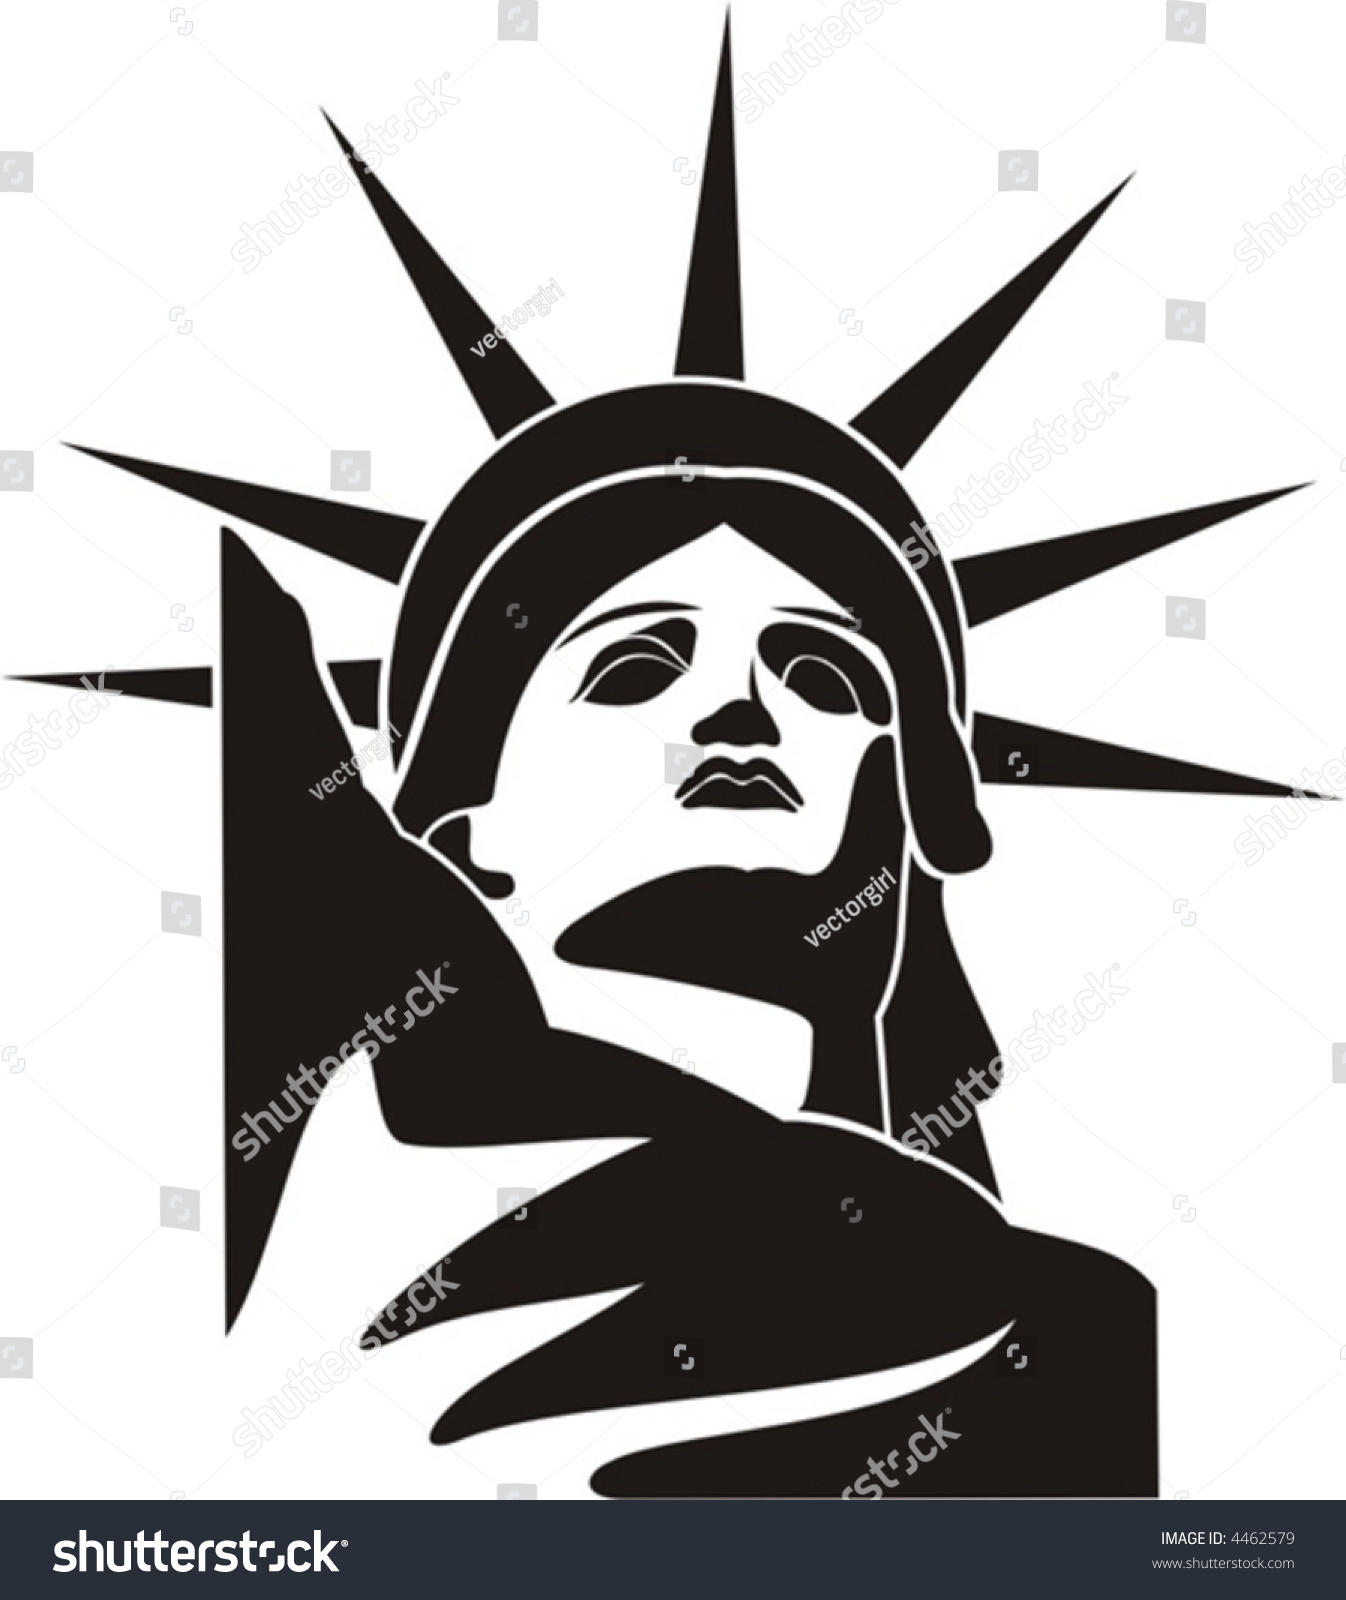 The Statue Of Liberty. Stock Vector Illustration 4462579 : Shutterstock